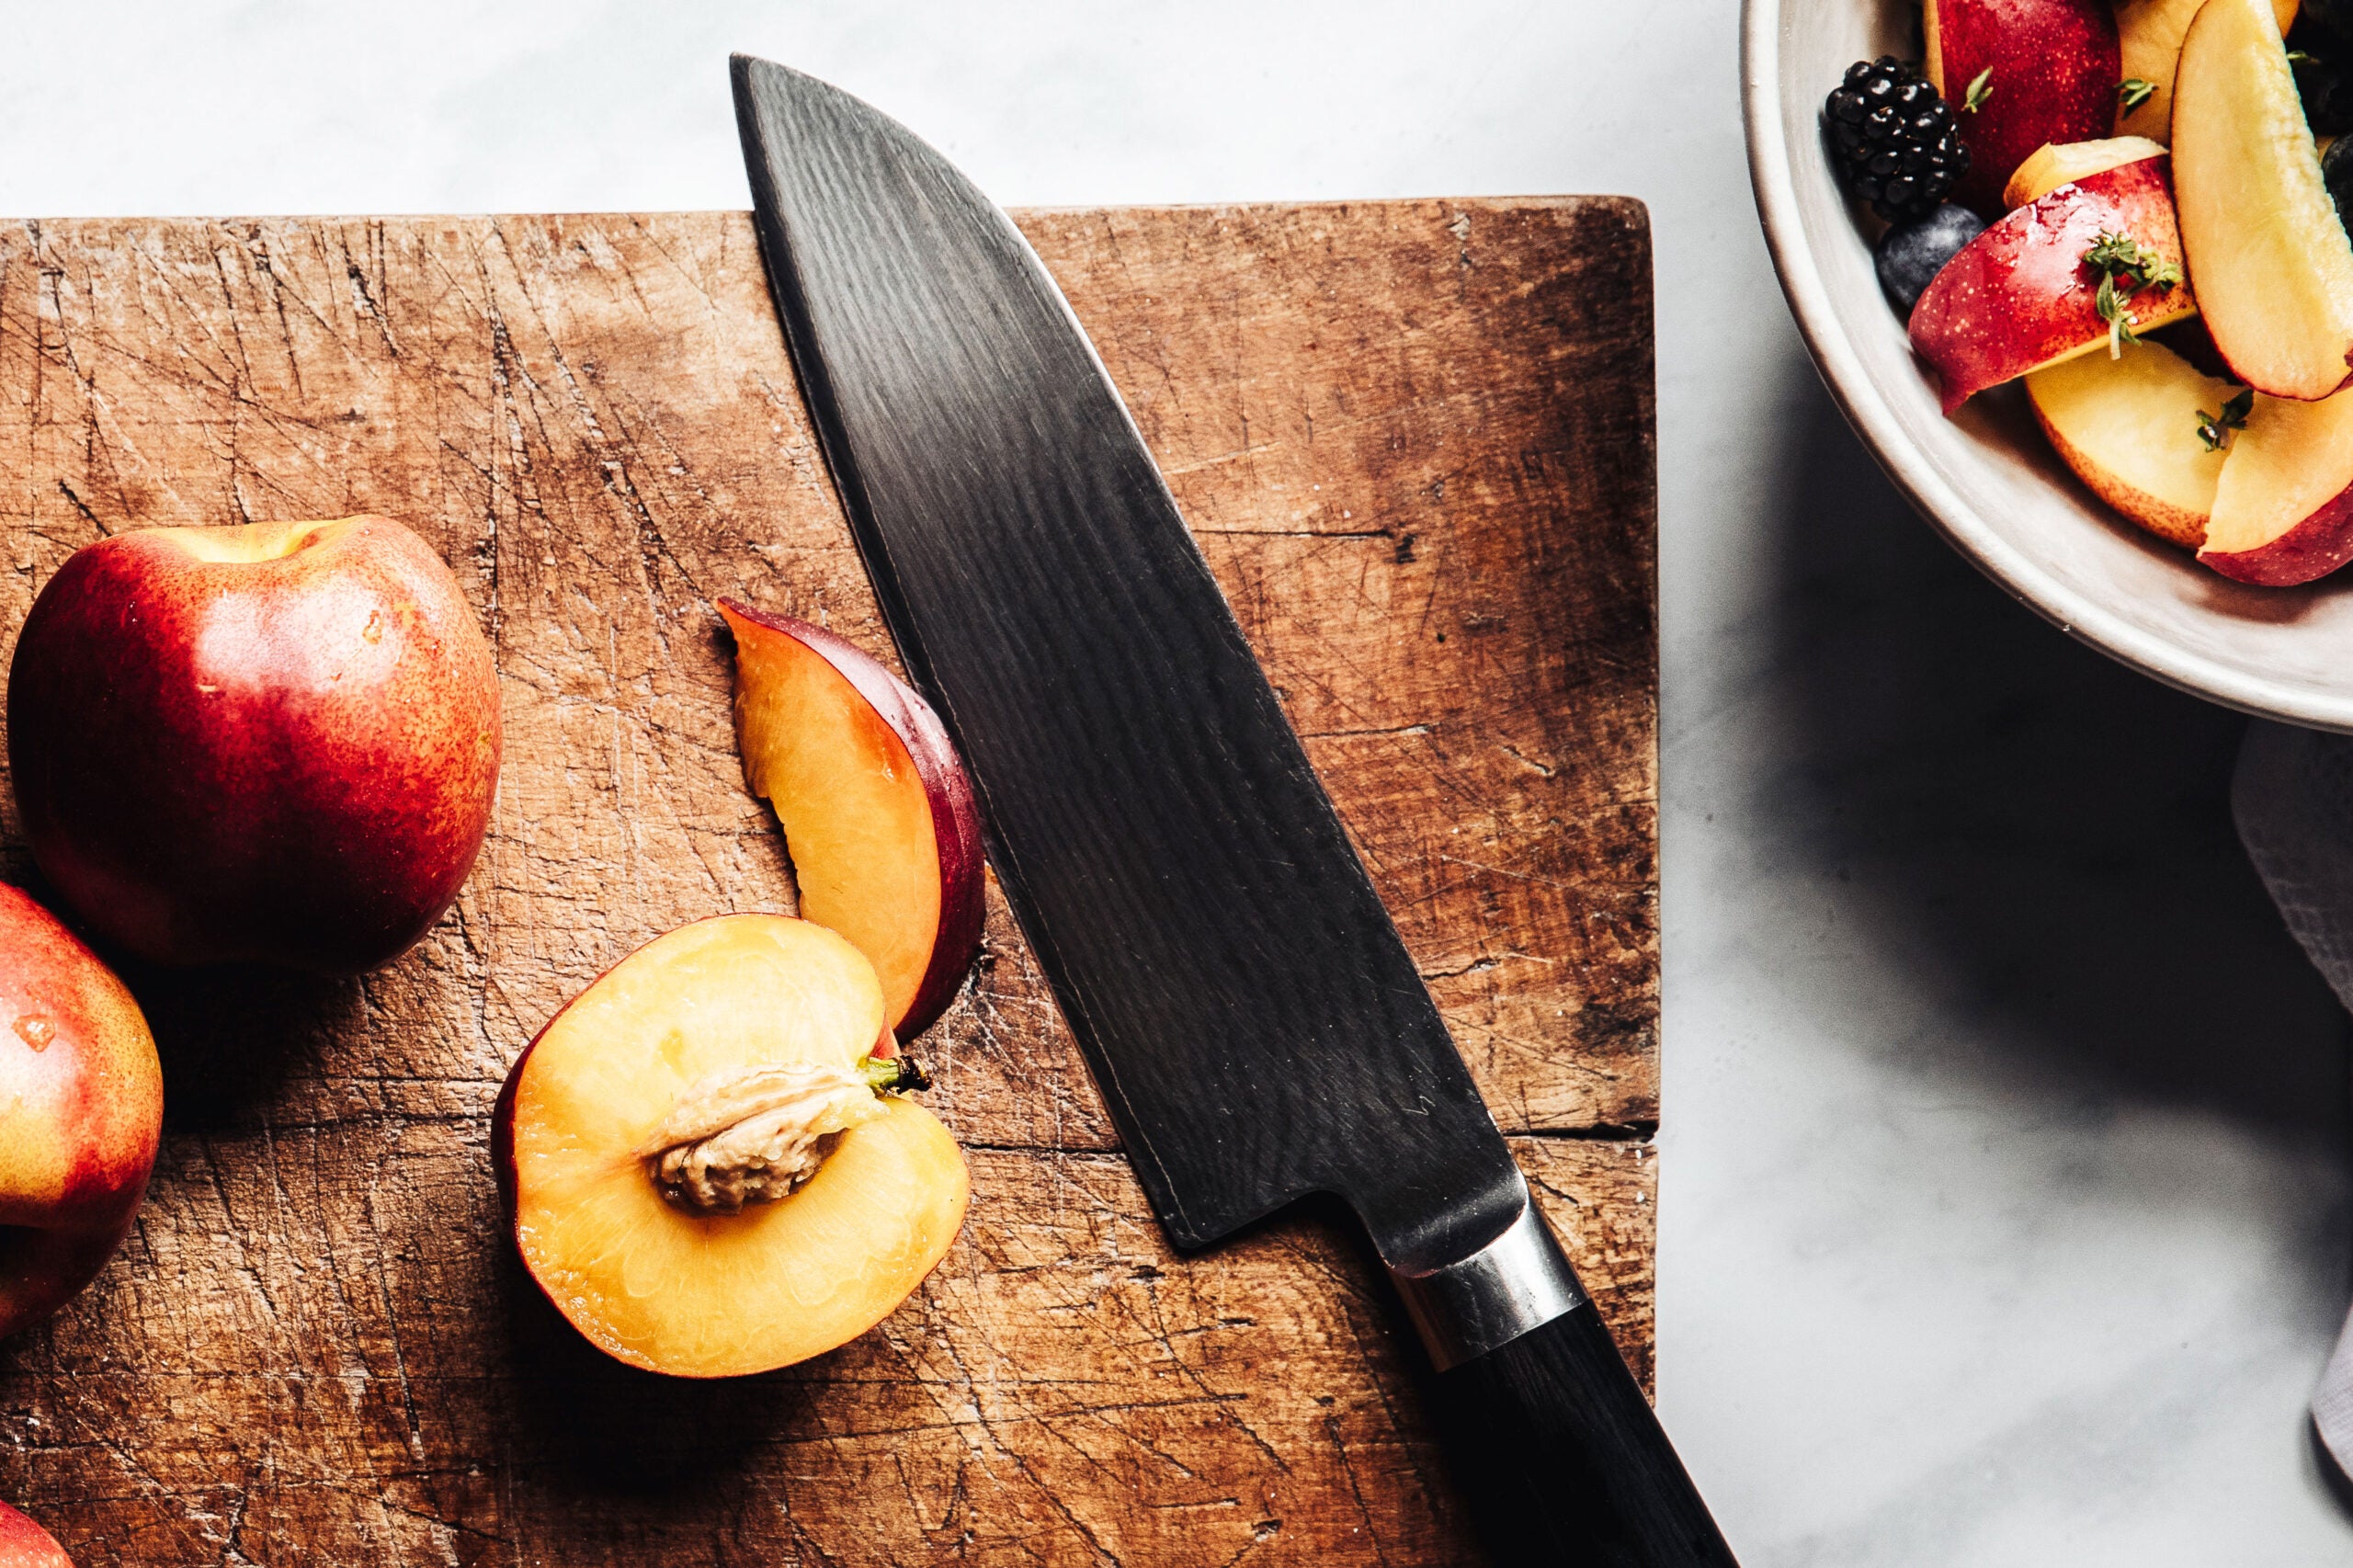 The Best Electric Knife Sharpener for Your Kitchen - Men's Journal